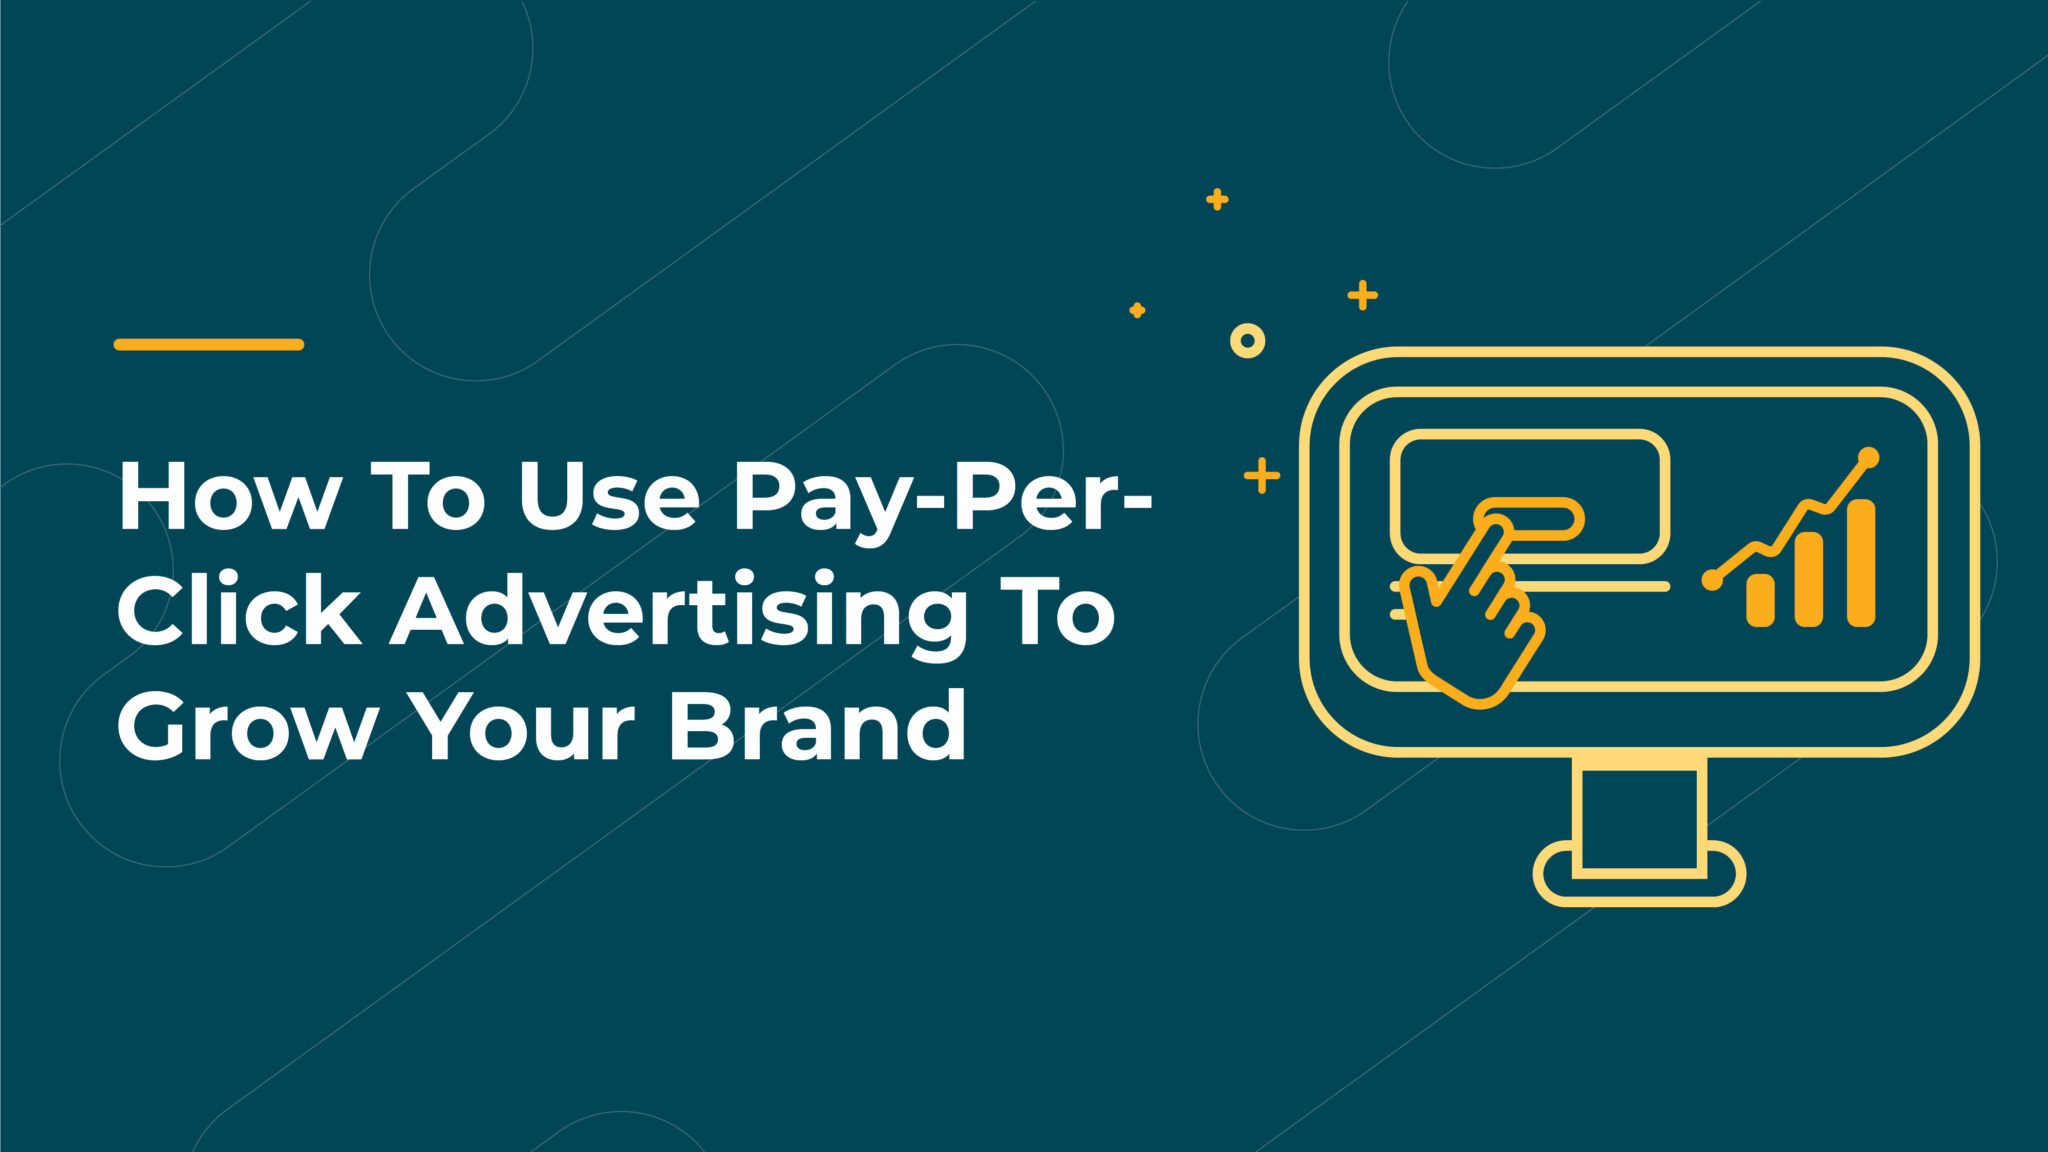 How To Use Pay-Per-Click Advertising To Grow Your Brand | TMI Collective